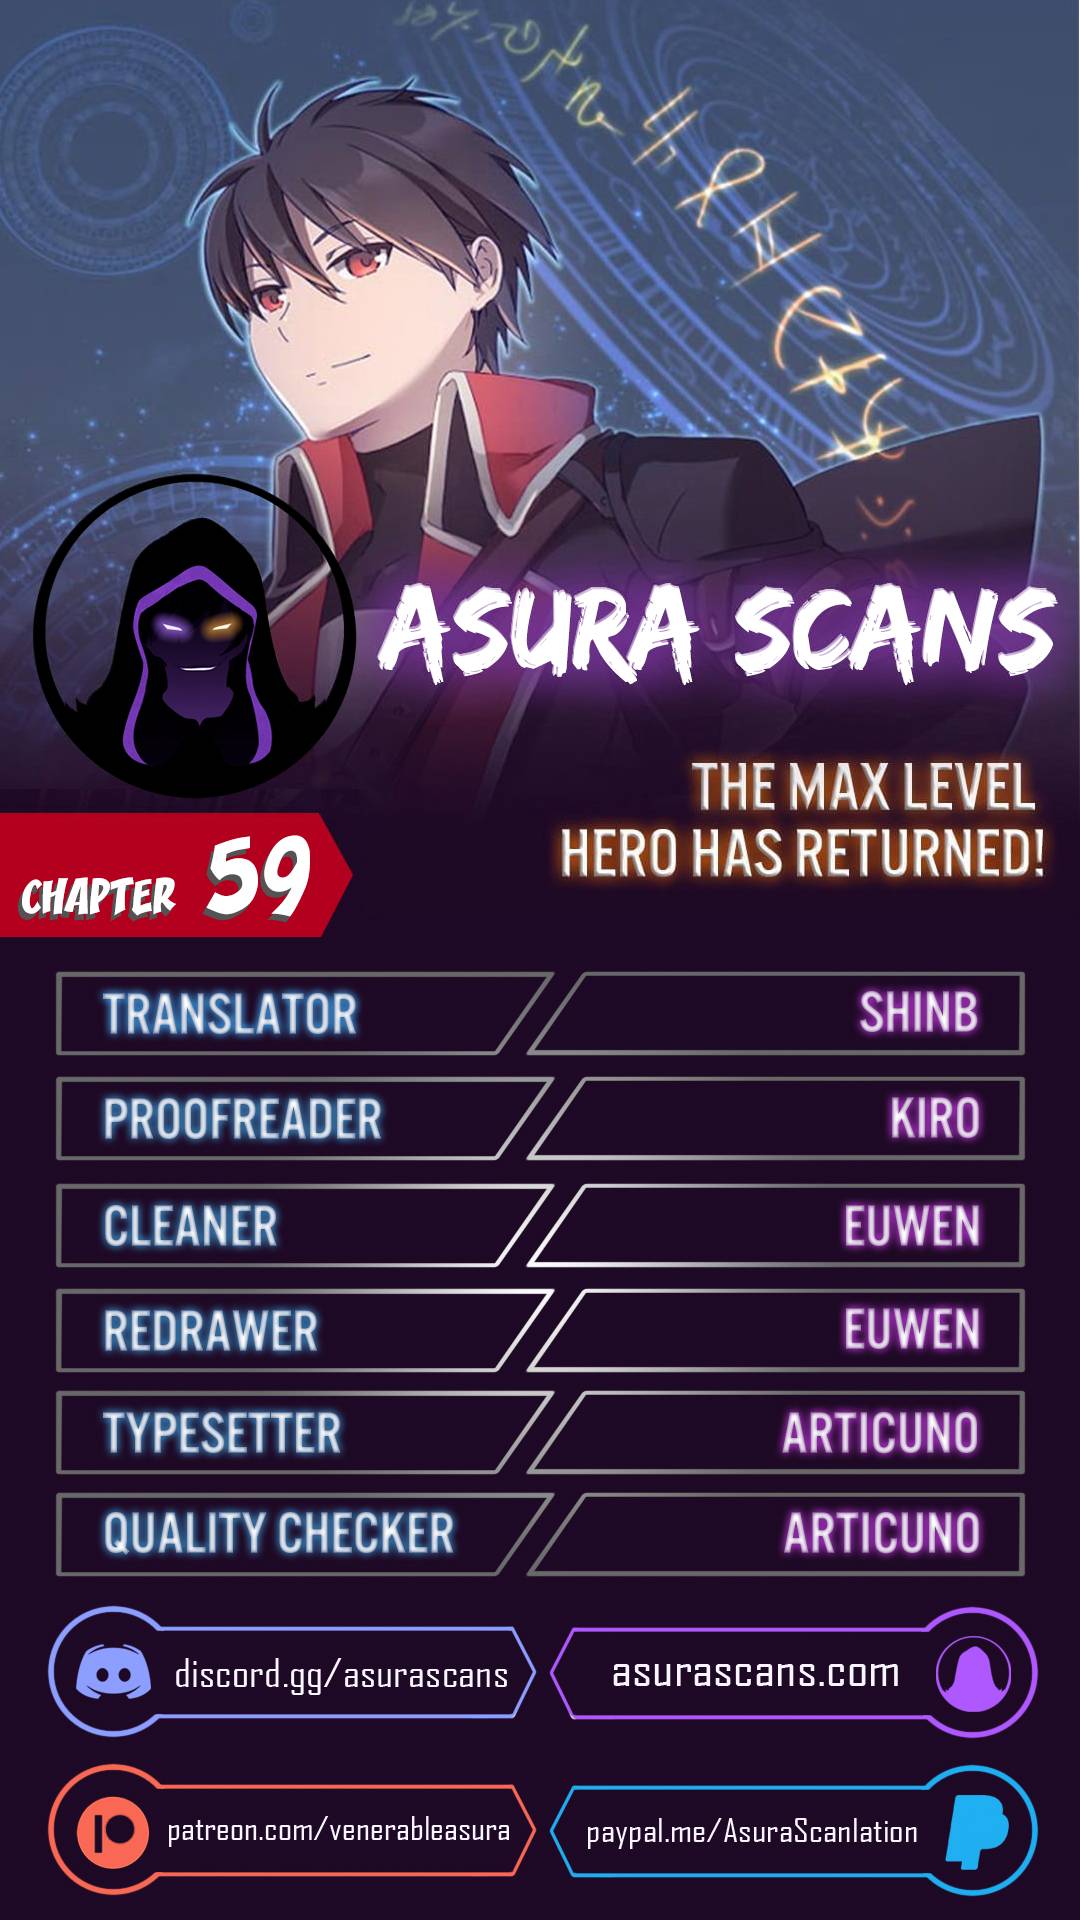 The MAX leveled hero will return! Chapter 59